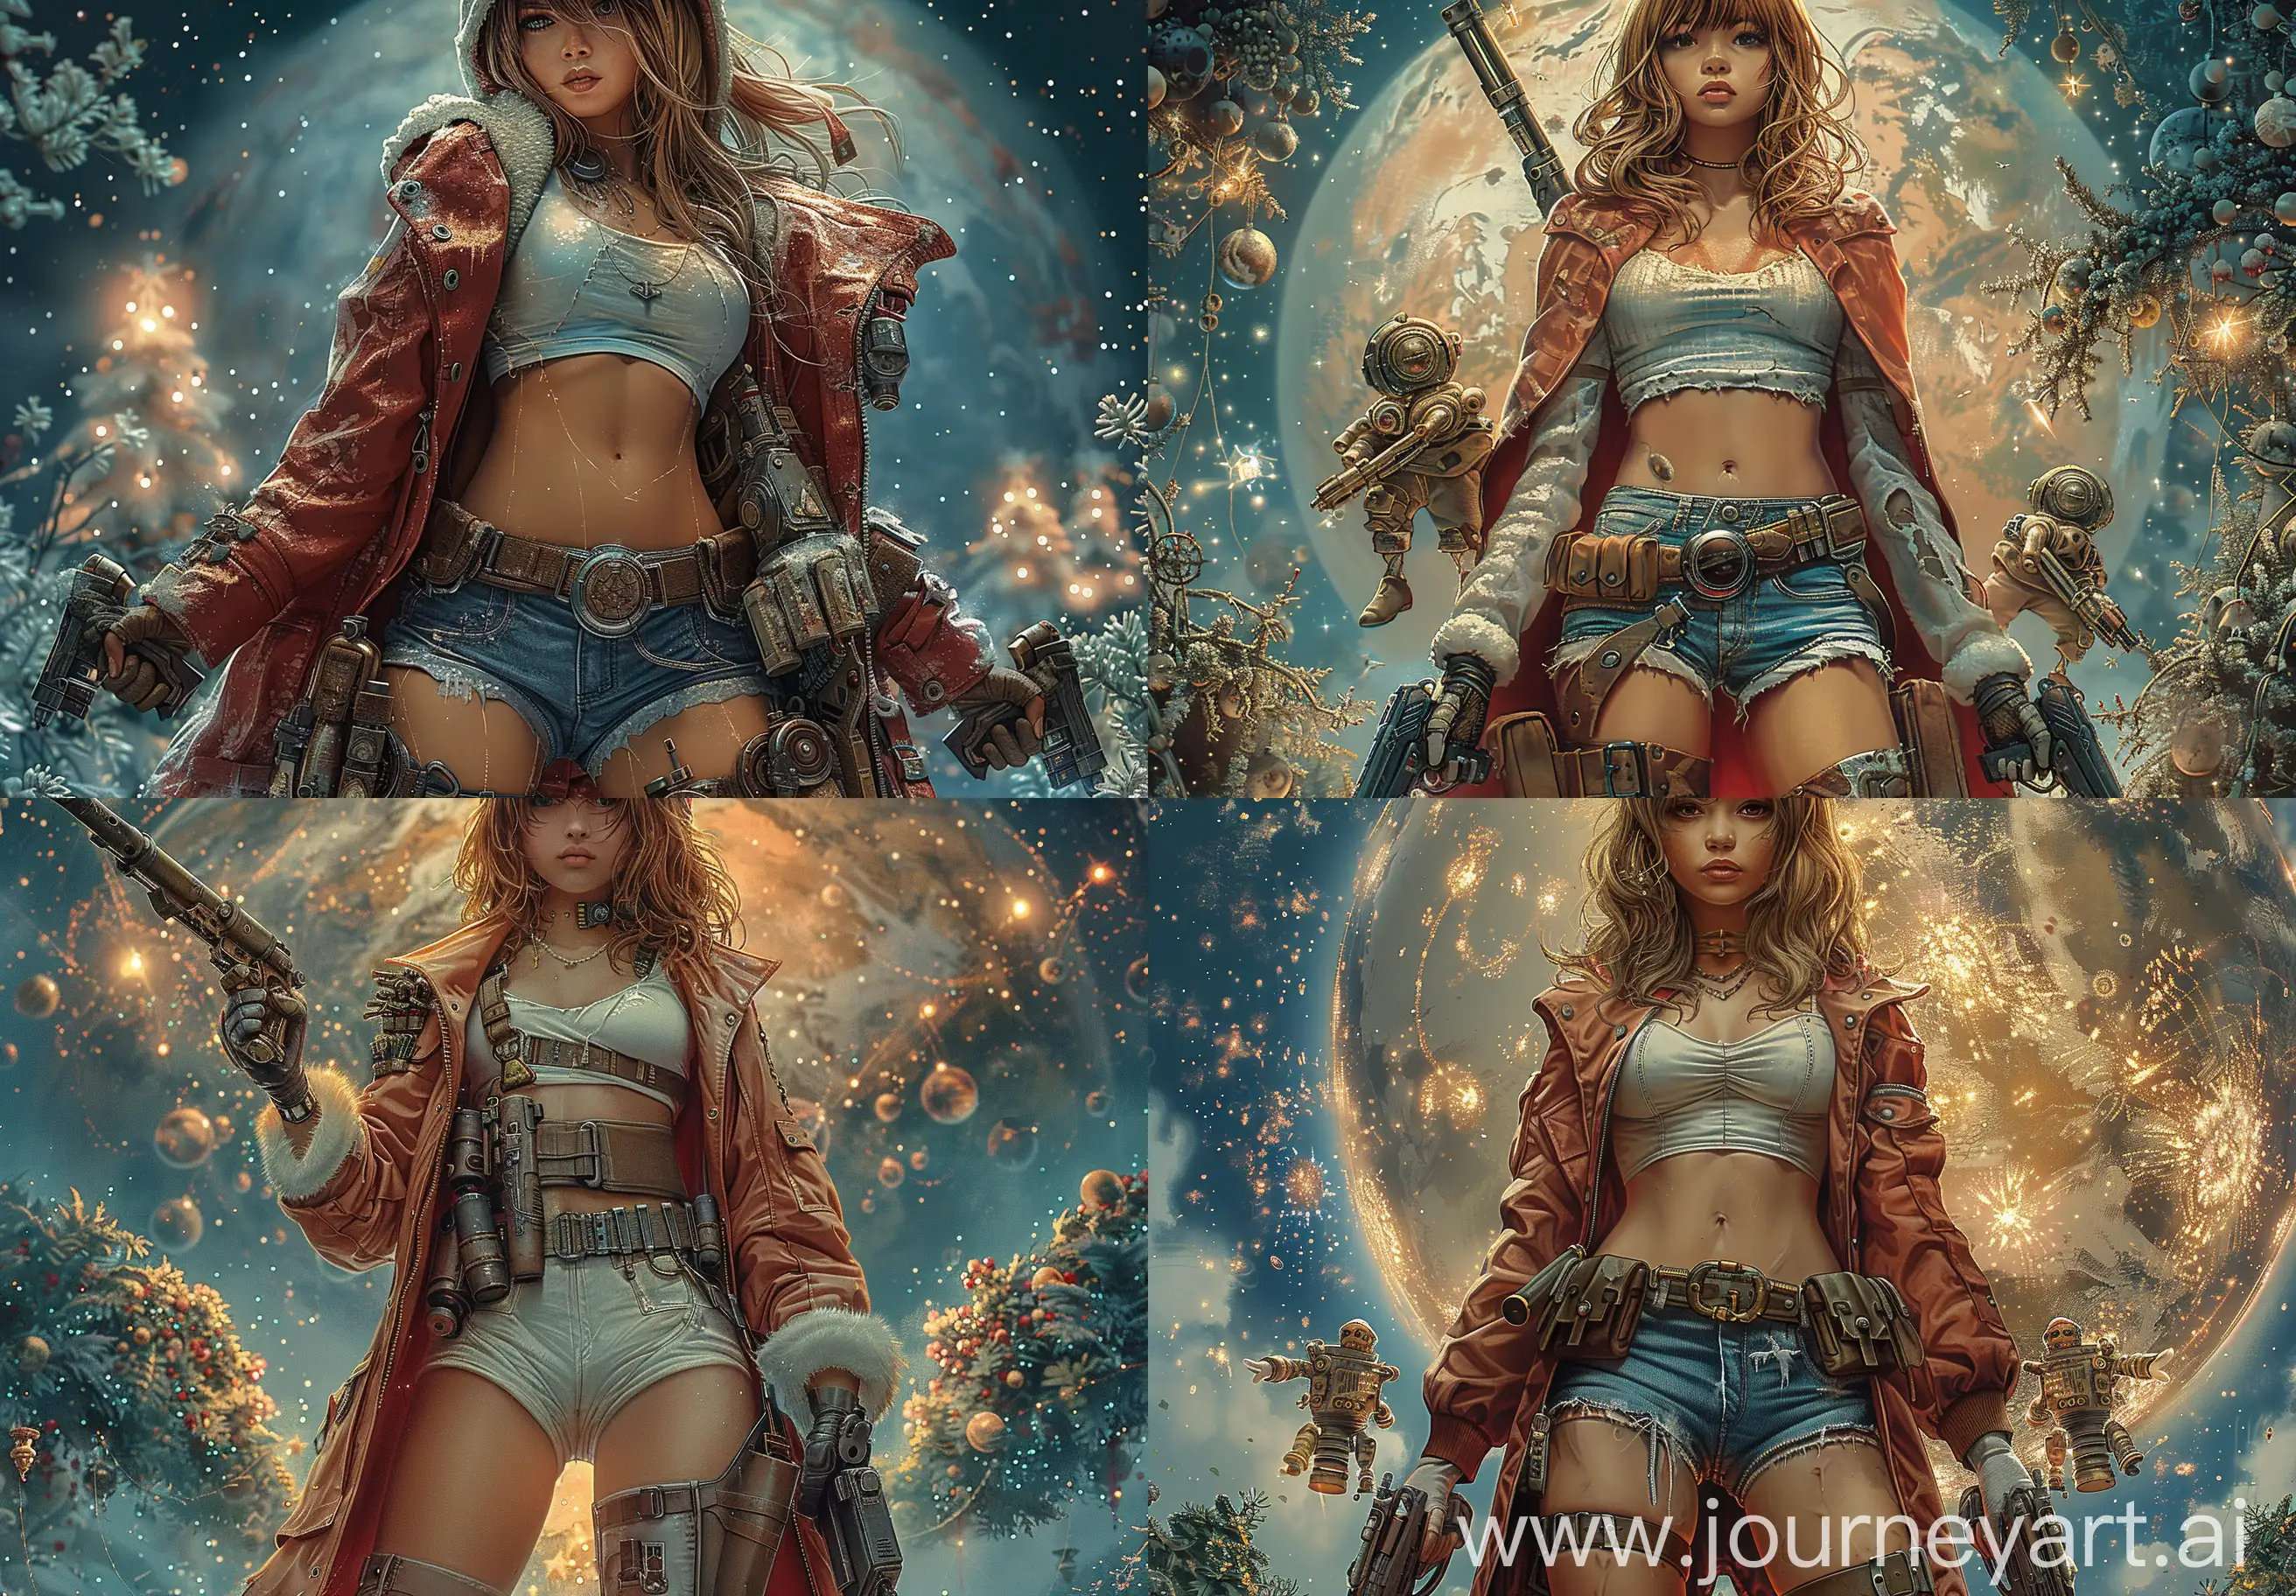 <https://s.mj.run/qXt1En2GZeM> (boris vallejo + luis Royo + yukisakura) ultra detailed visually rich concept art illustration in steampunk style of a young woman bodyguard, short shorts mini topic and a red raincoat wery more armor and ammunition with two little droids-elfs defeat Santa, created with main focus on cybermechanical and magical overgrown planet in space sky, (((candid photography)))), luminous and enchanting, dark and eerie, illuminated dark fantasy realm, (((rule of thirds))) intricate details, subtle colors, fantasy realm, (((dynamic pose)))) --v 6.0 --ar 13:9 --s 999